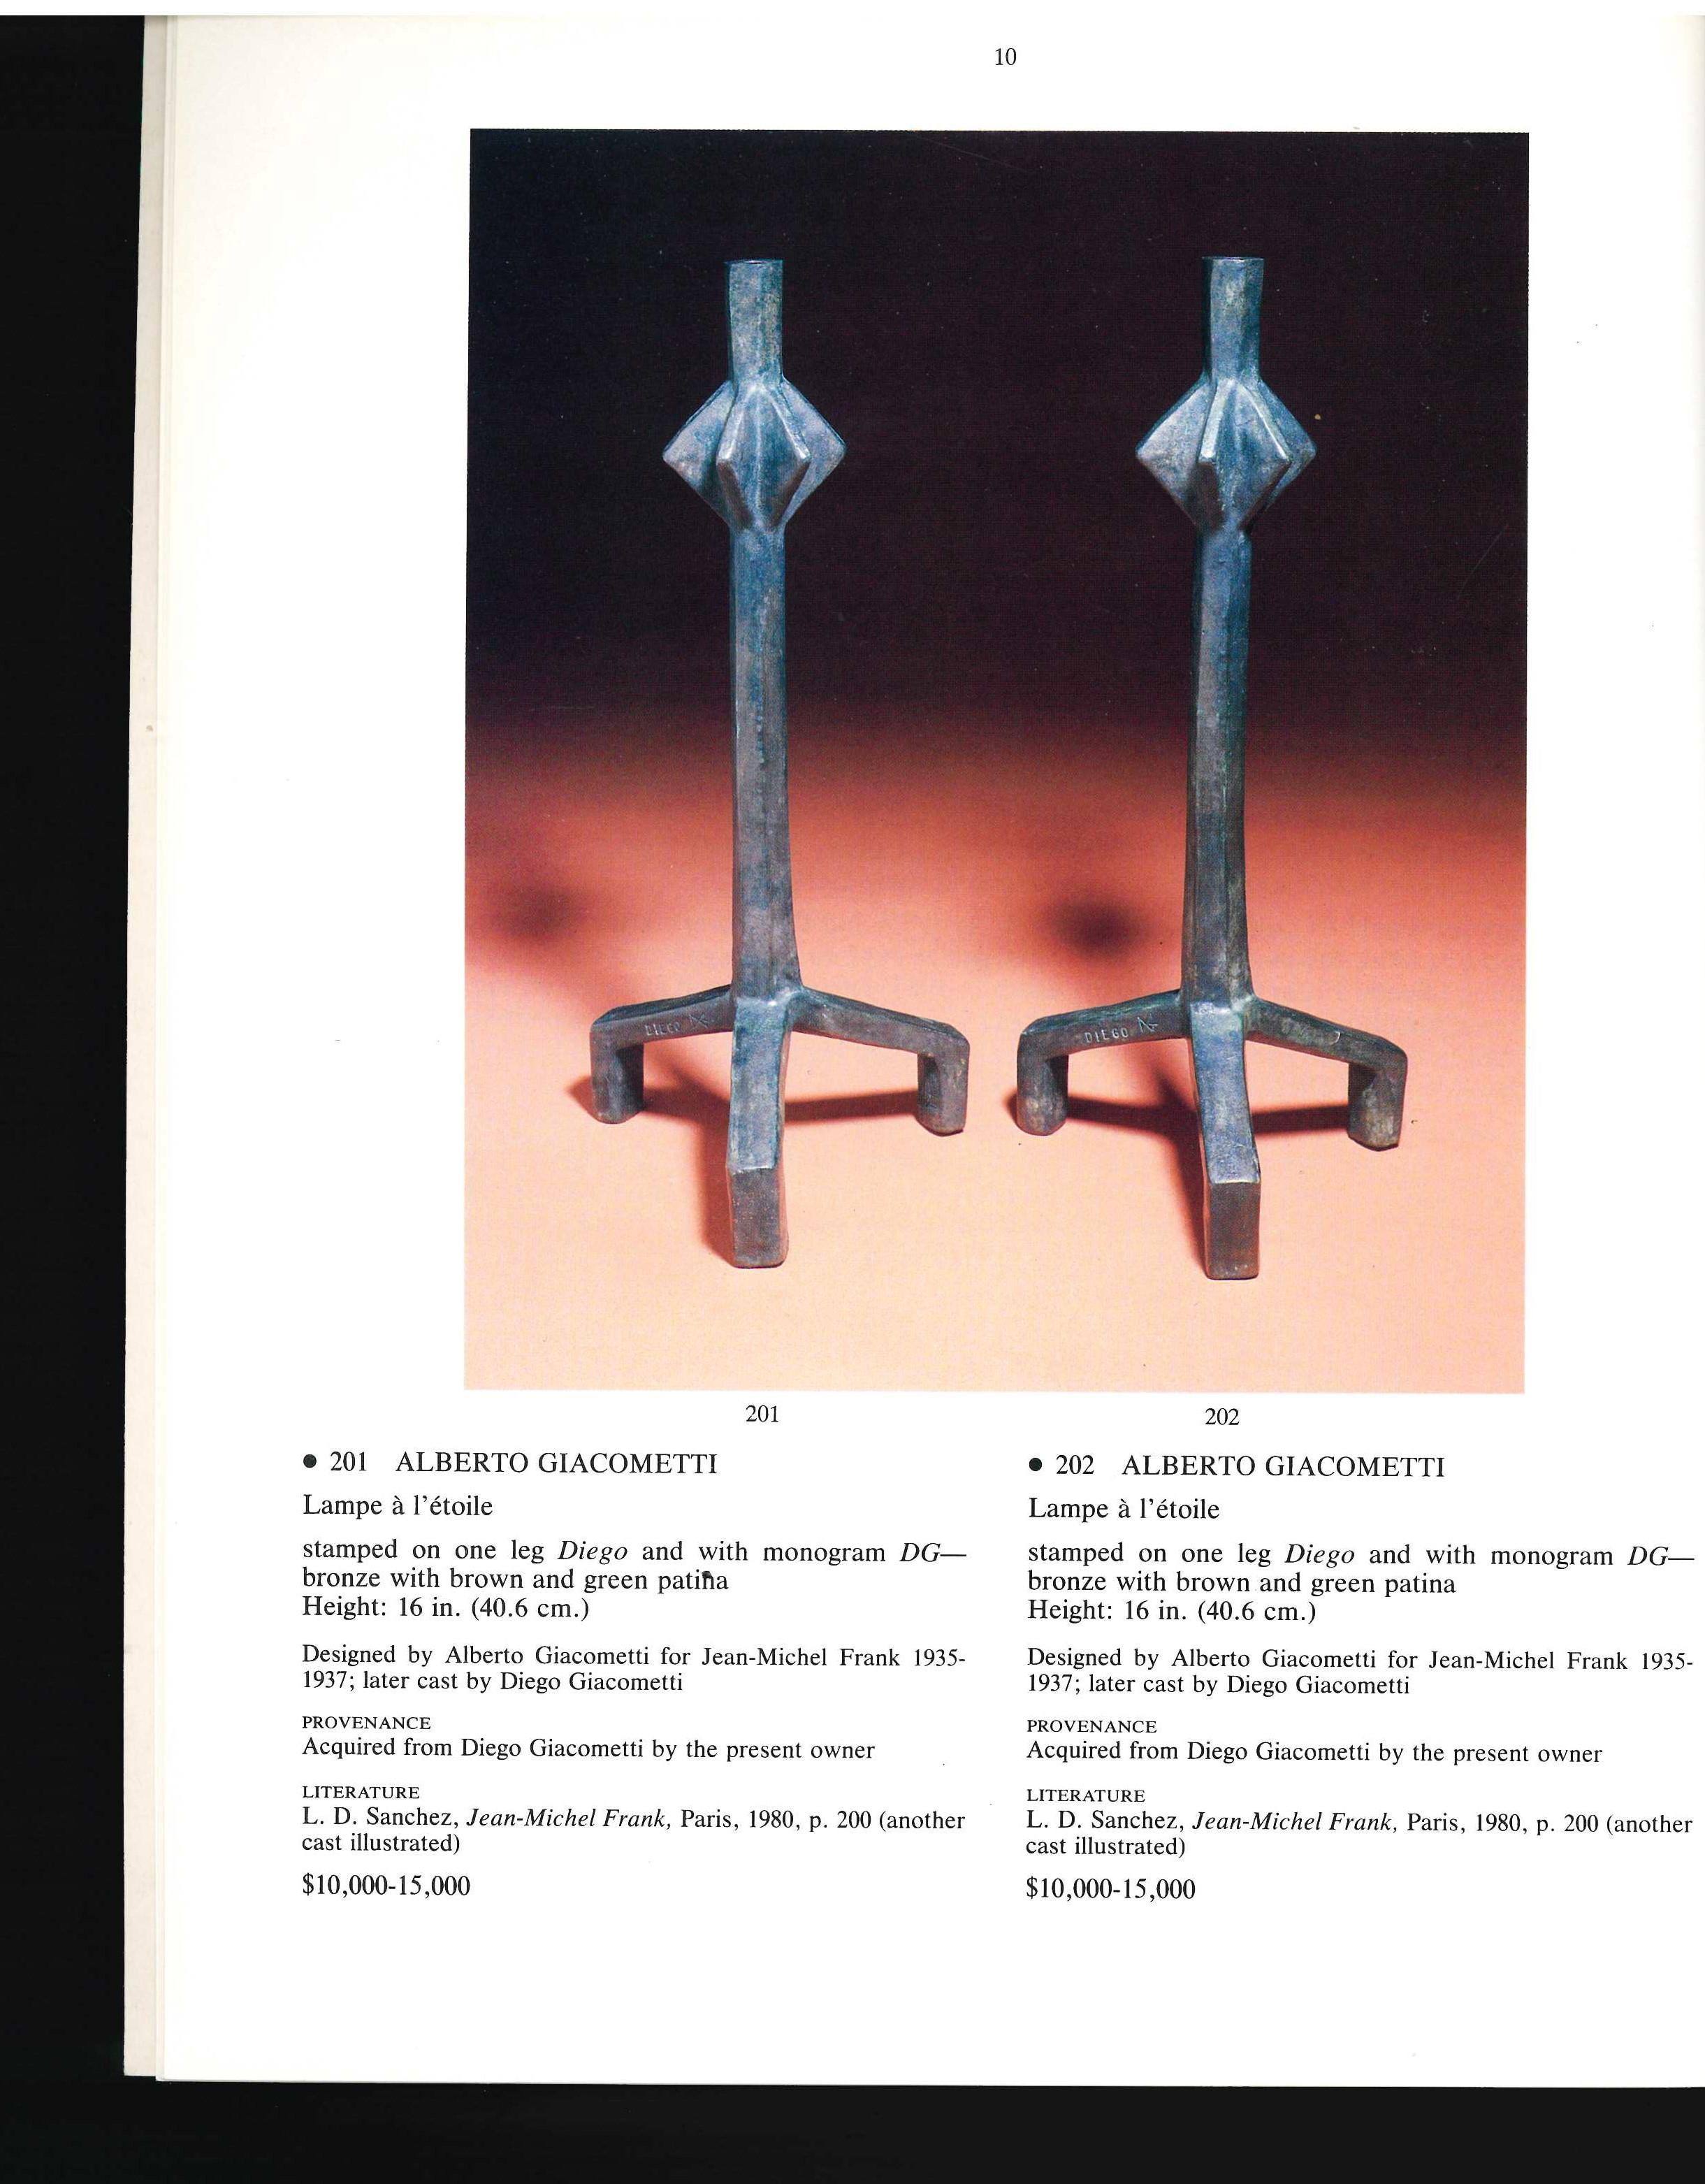 This is a sale catalogue produced by Christie's New York in May 1987 for a sale of Furniture and works of Art by Alberto and Diego Giacometti. there are 38 lots, all photographed in colour and with descriptions in English and French, together with